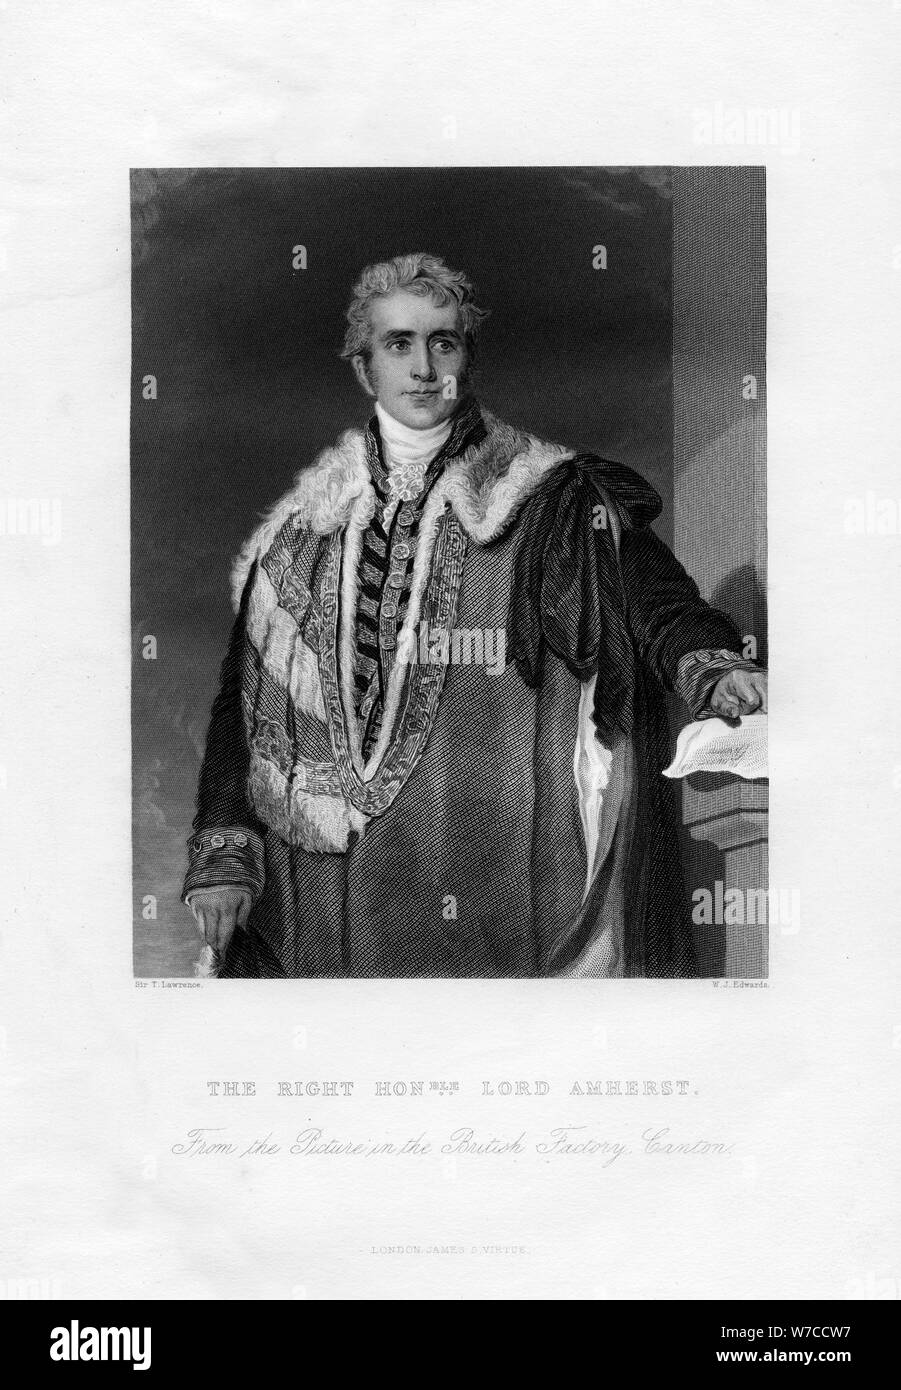 William Pitt Amherst, 1st Earl Amherst, Governor-General of India, 19th century.Artist: WJ Edwards Stock Photo